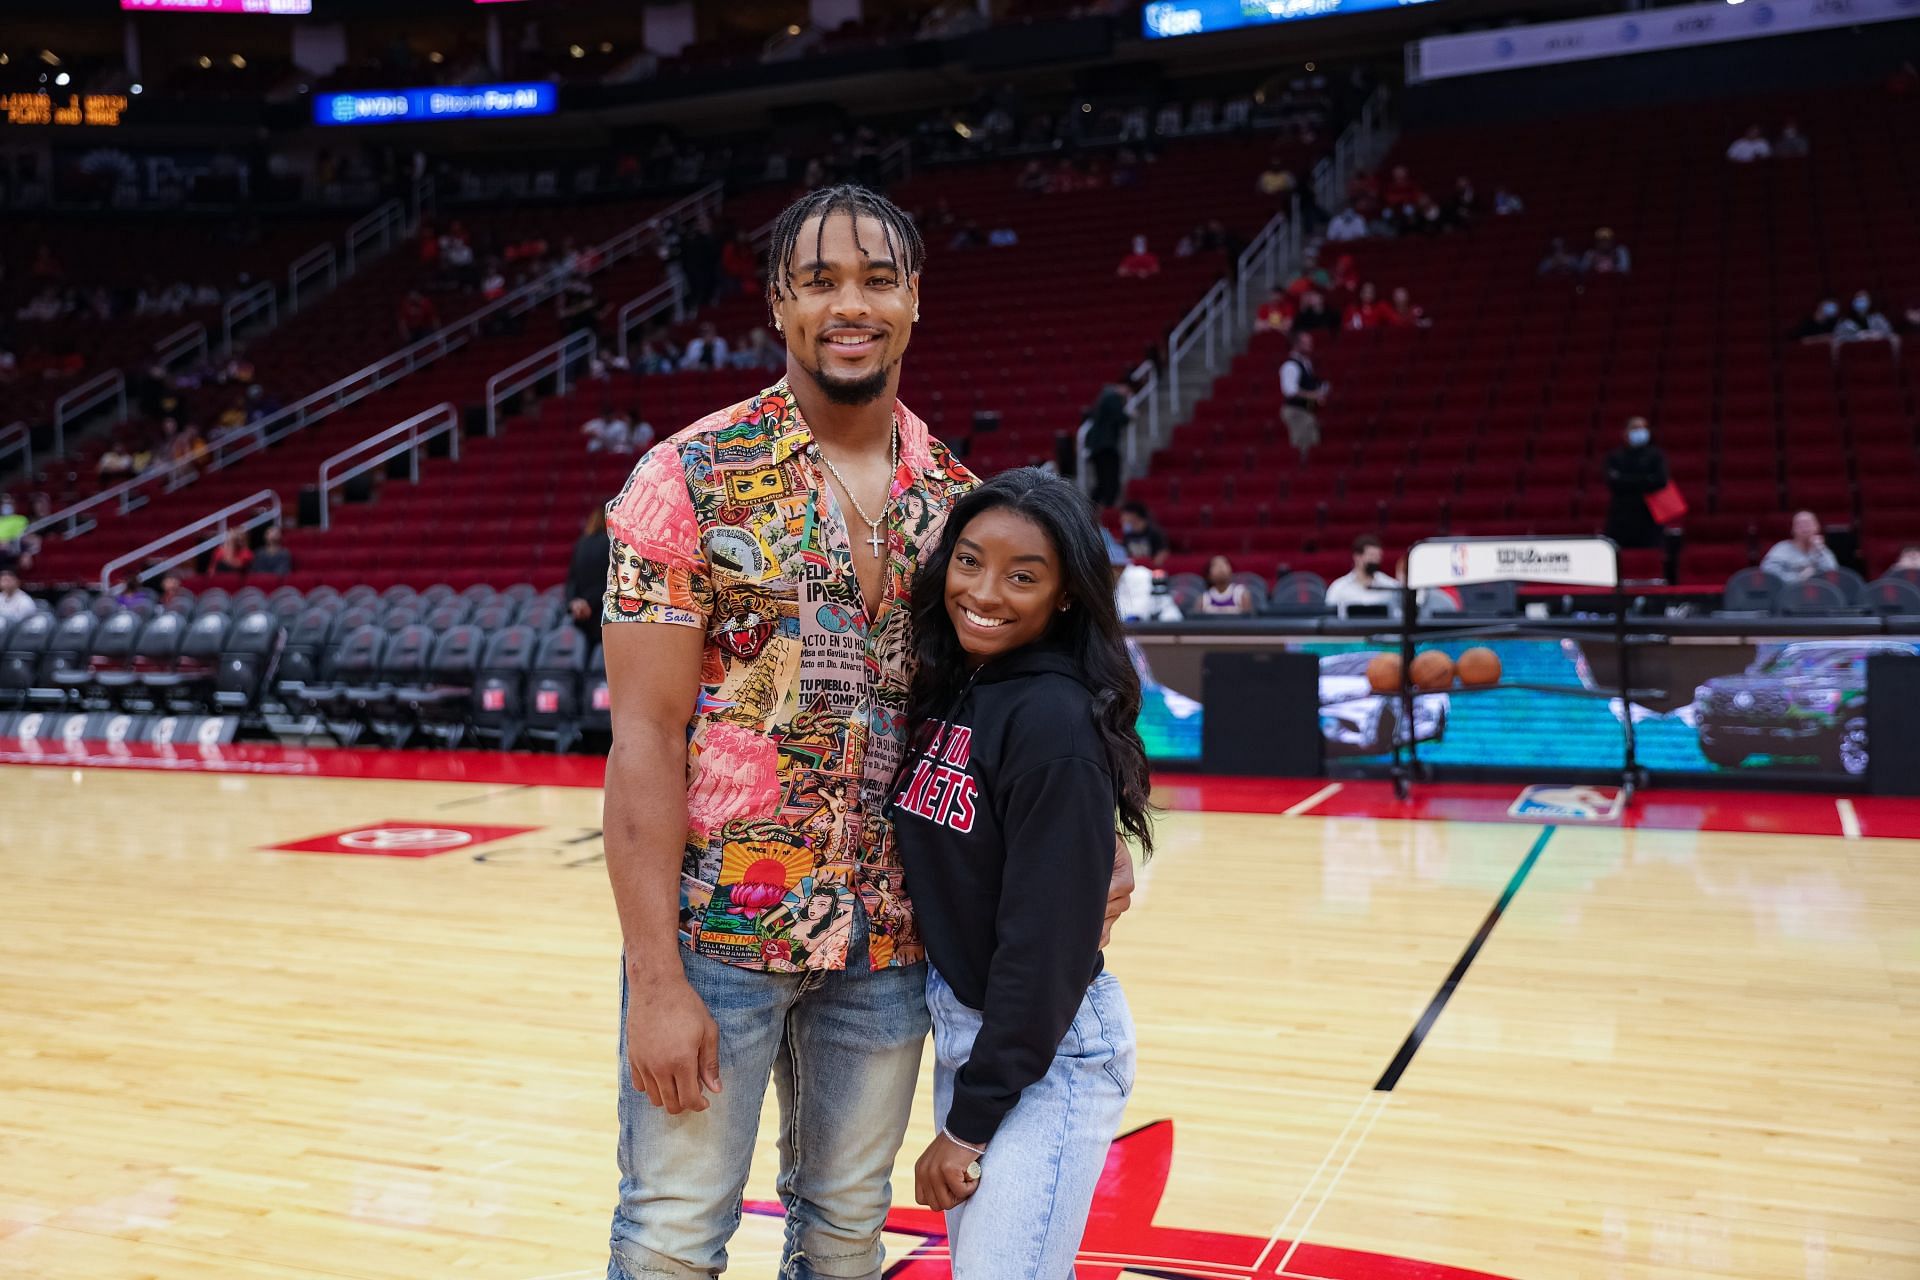 Simone Biles and Jonathan Owens at the Los Angeles Lakers vs. Houston Rockets game in 2021 in Houston, Texas